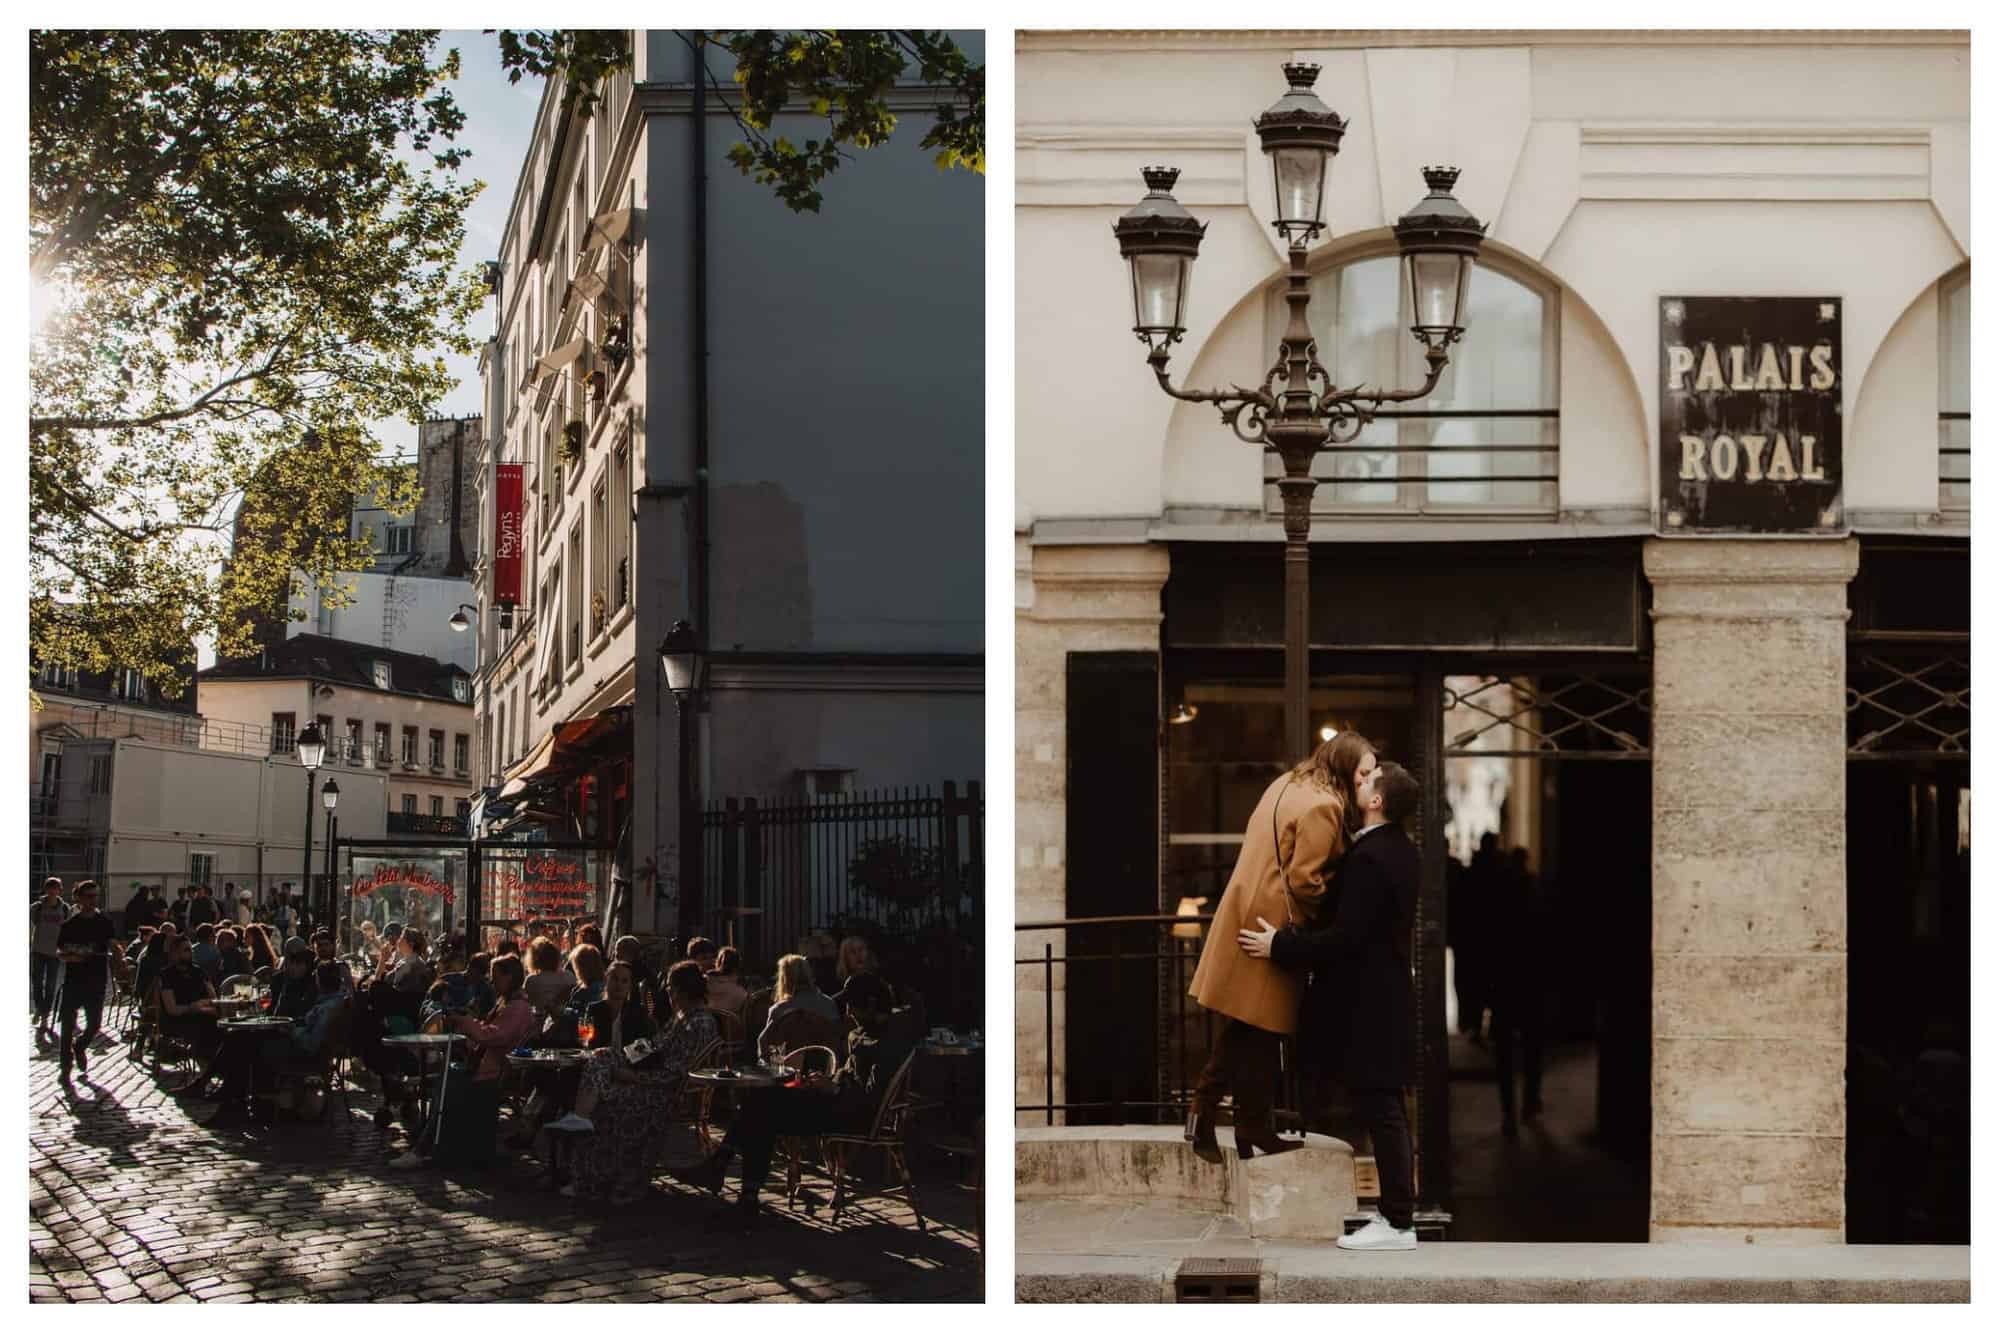 Left: Parisians are enjoying the sunset and their orange drinks in a terrace. Left: A woman in a beige coat and a man in black coat kisses each other.